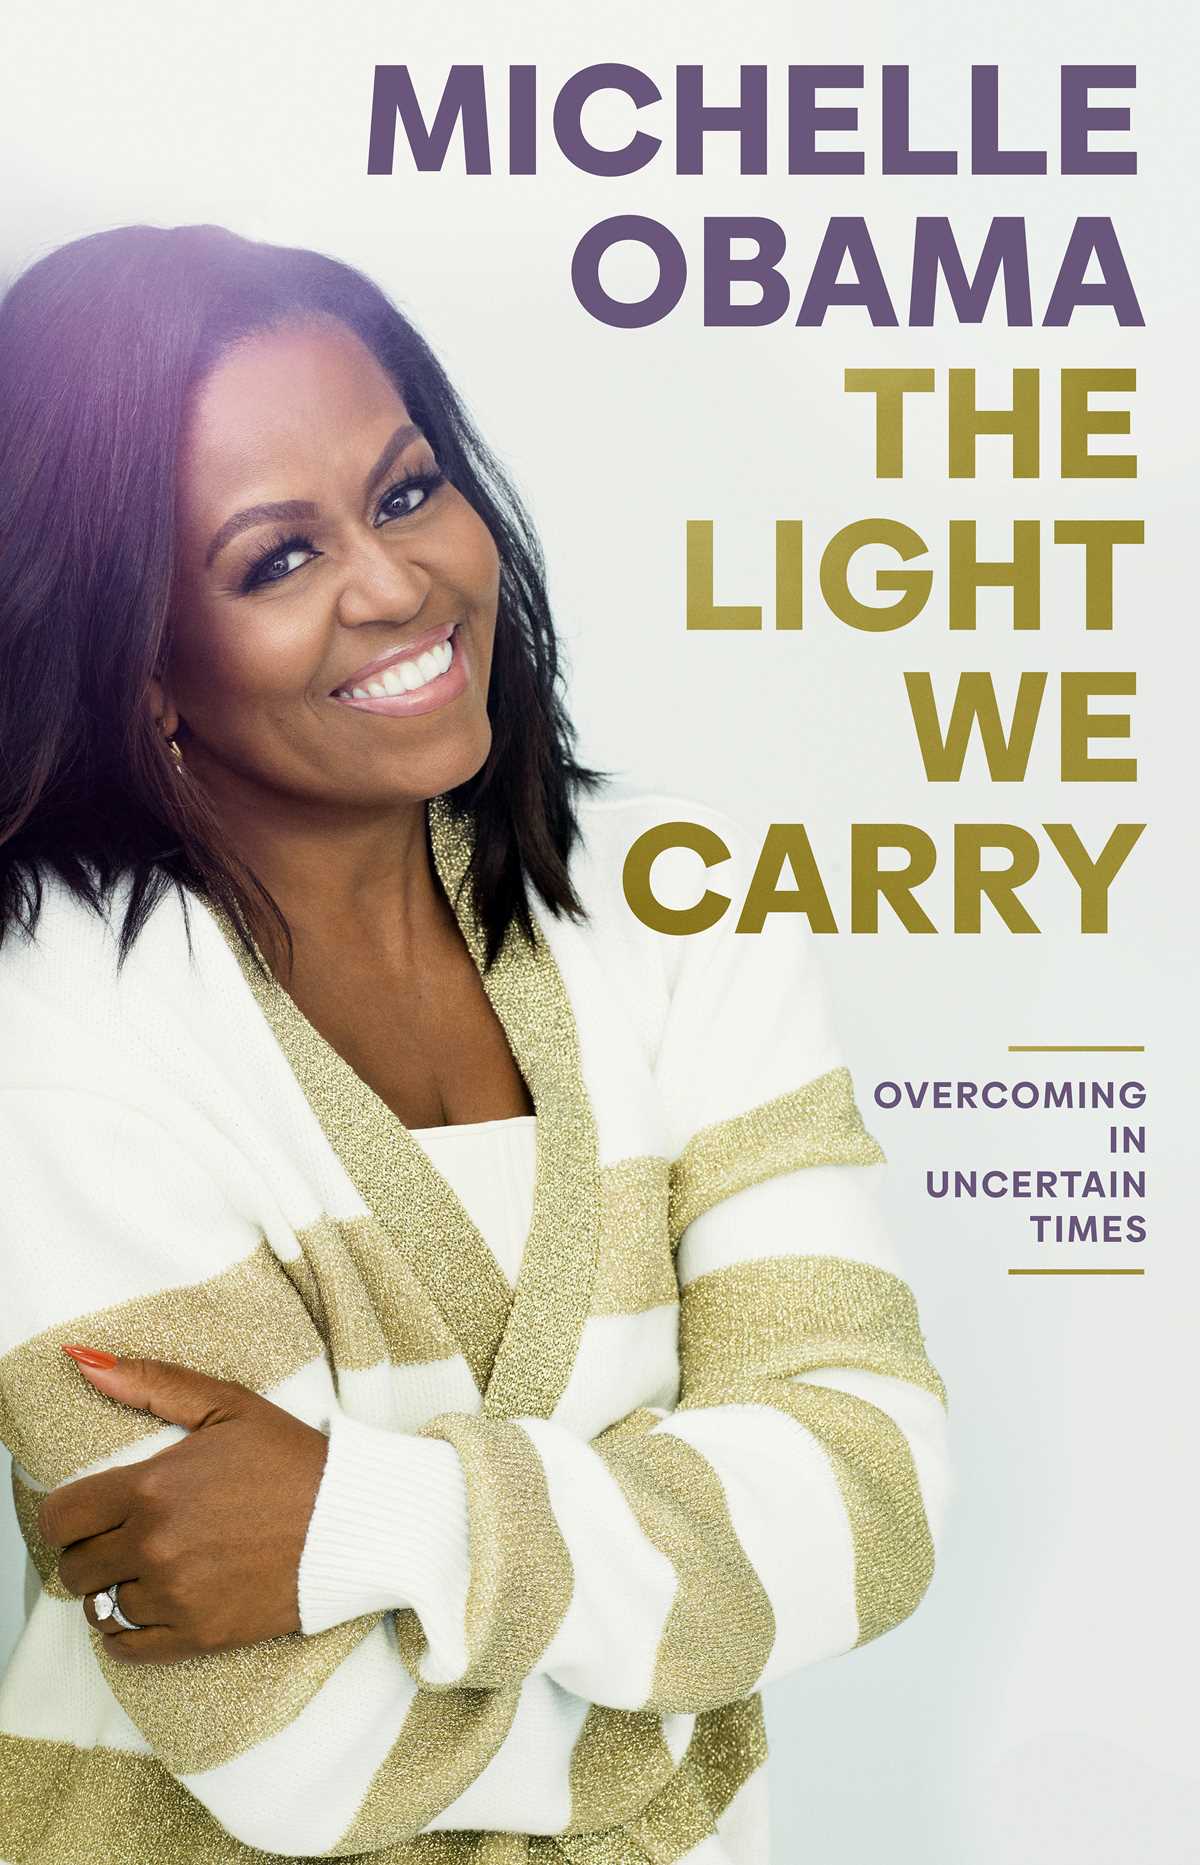 Michelle Obama's book 'The Light We Carry' coming this fall MarketBeat